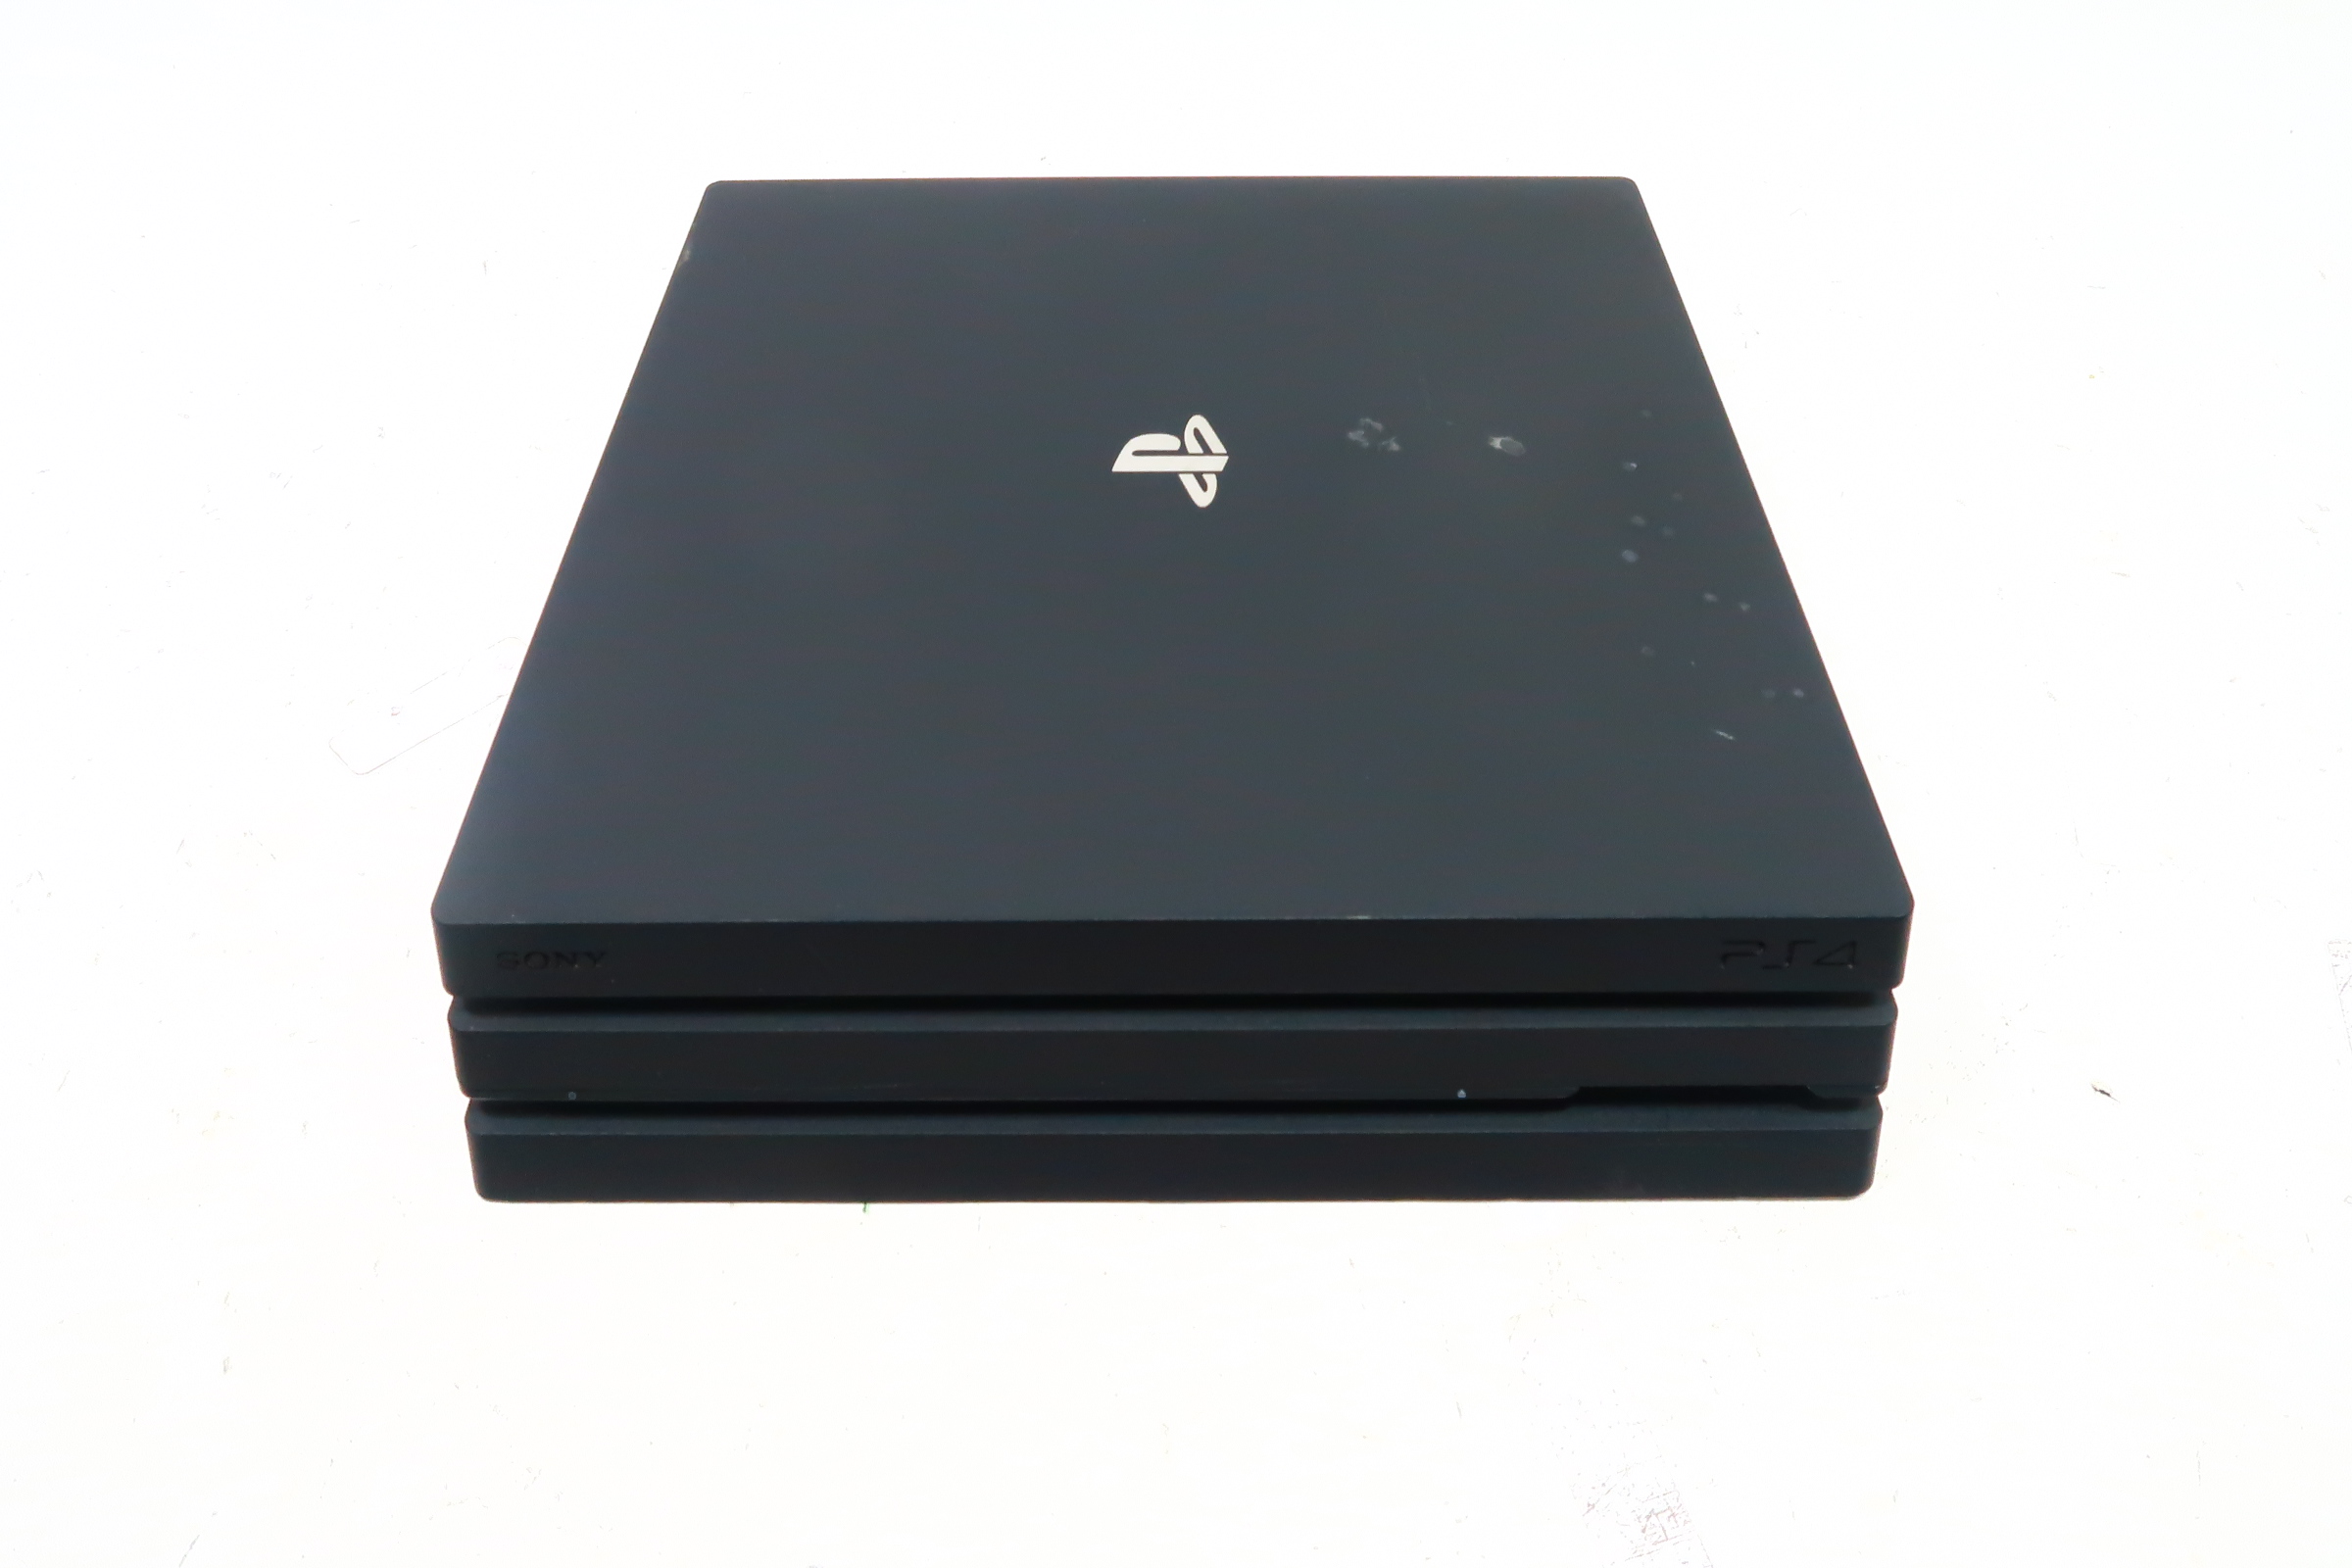 Sony PlayStation 4 Pro CUH-7015B 1TB 4K Video Game Console - 5866